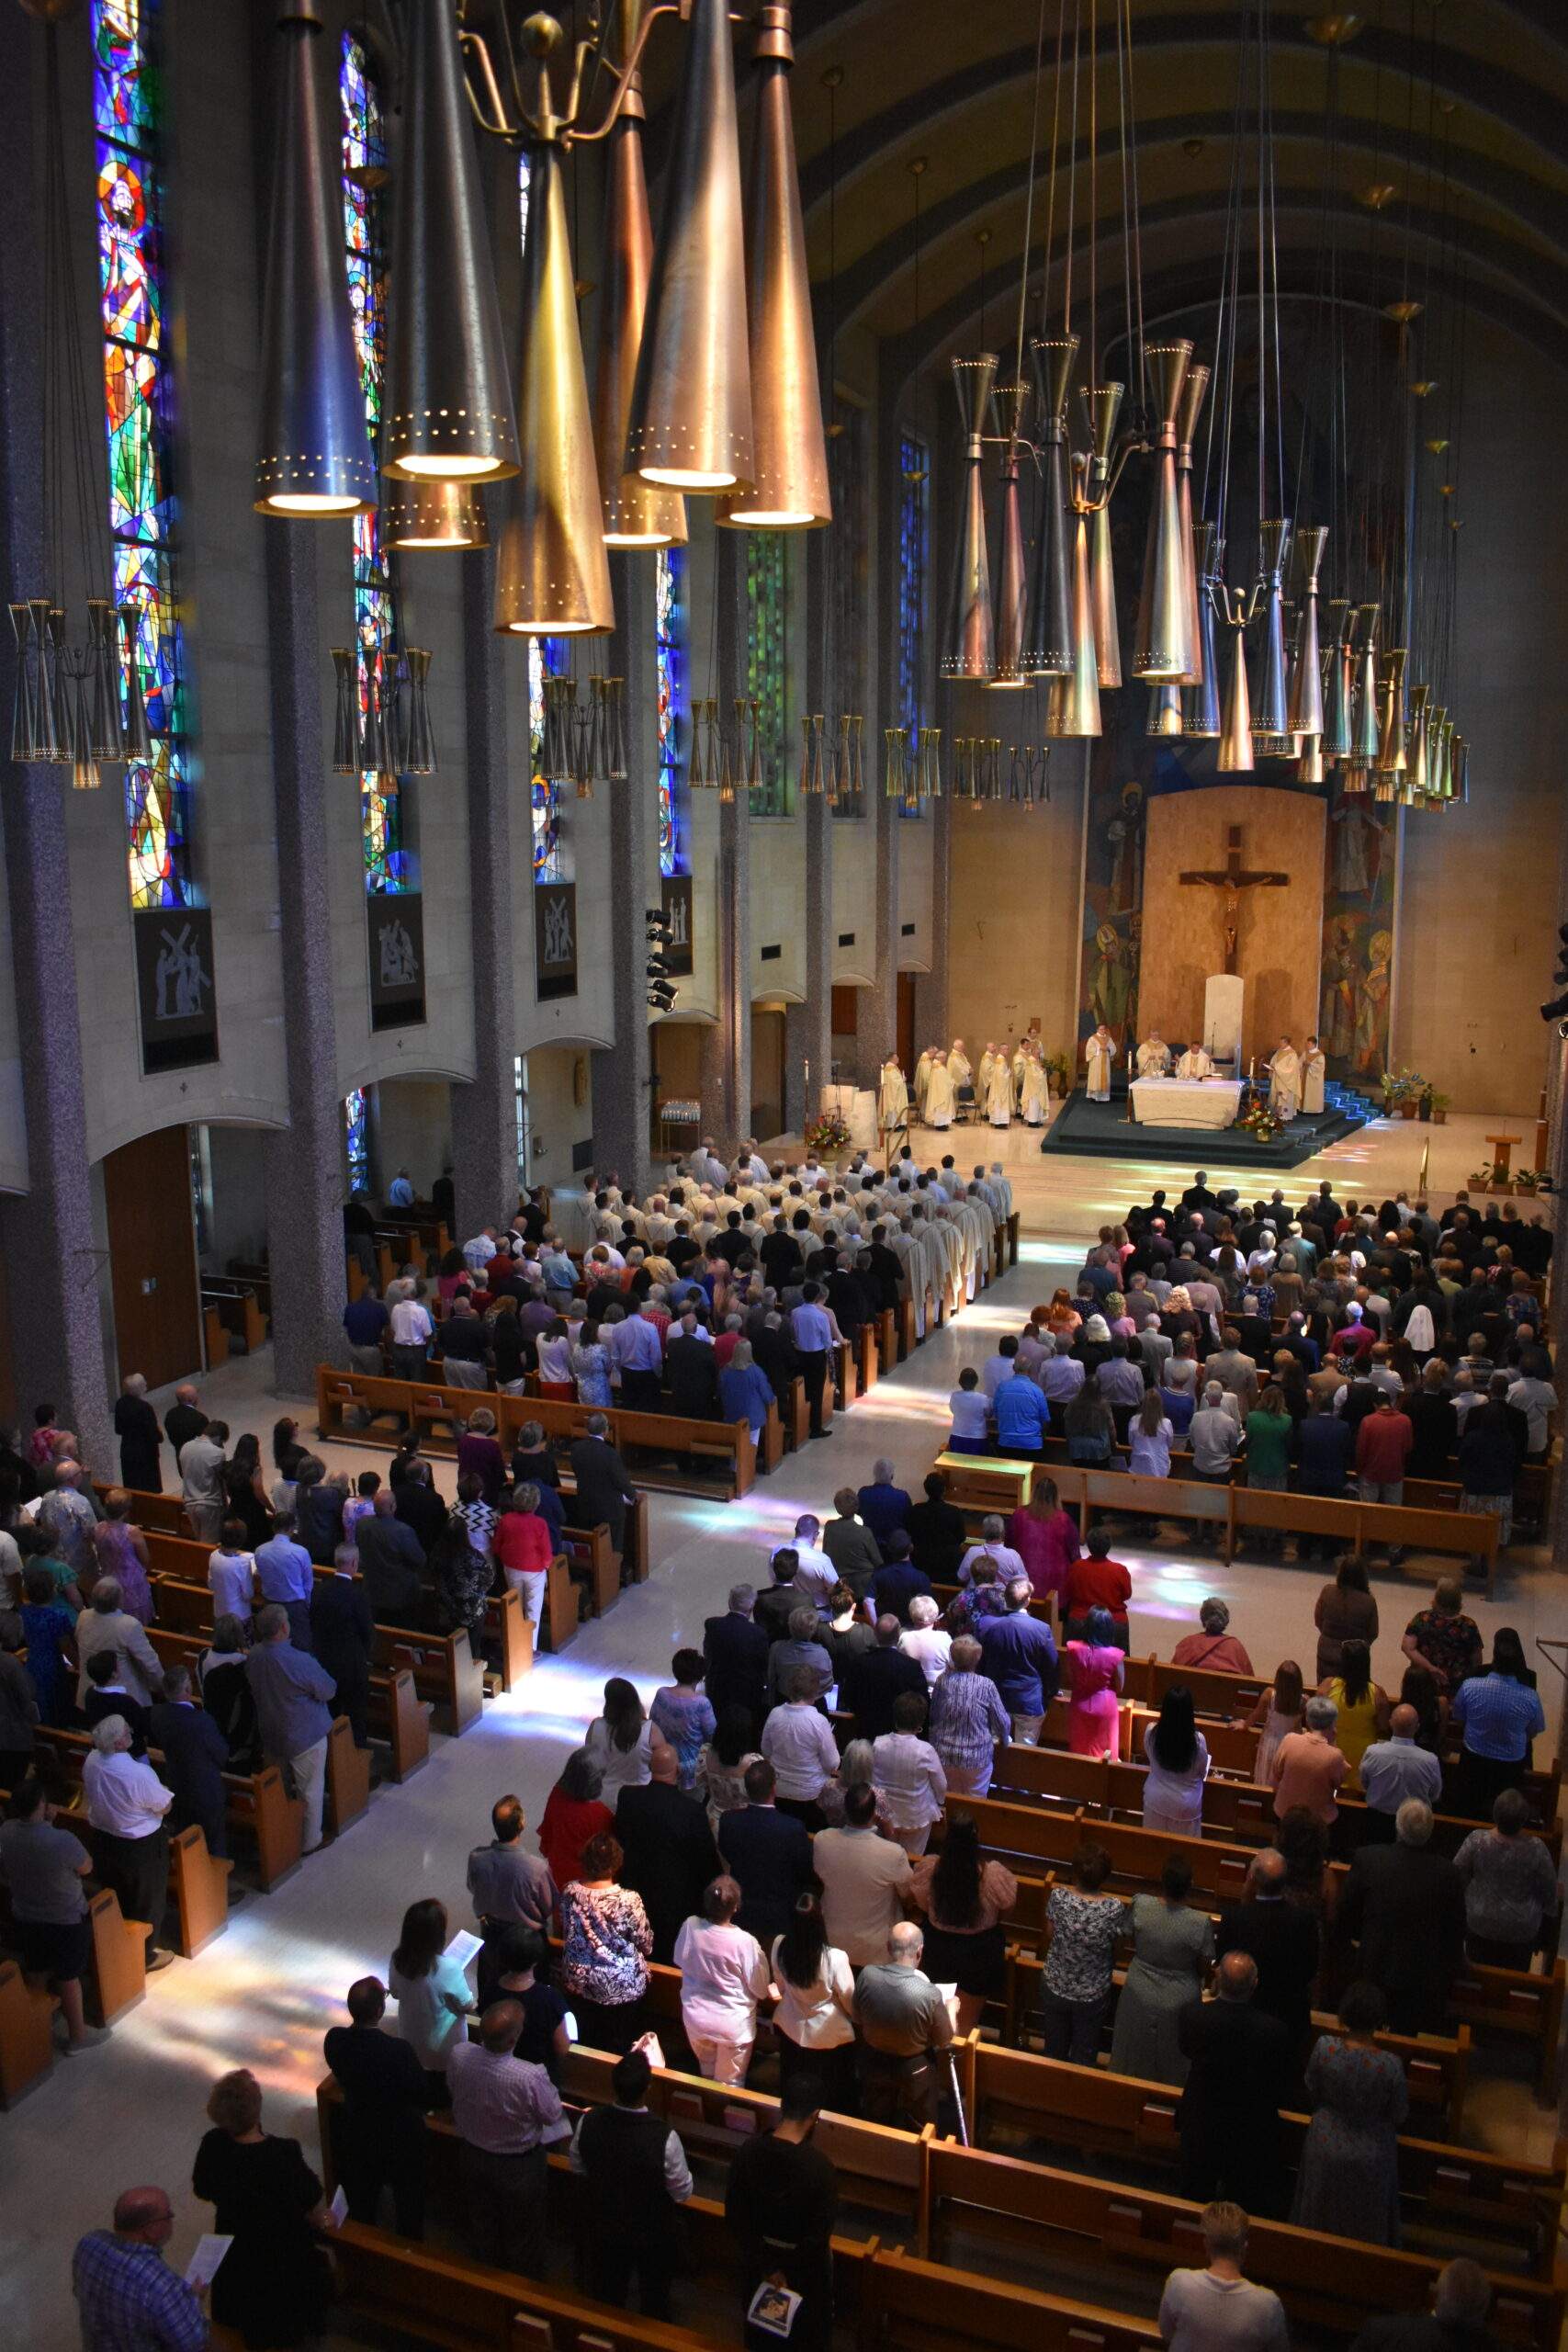 The pews at St. Columba Cathedral were full for the deacon ordinations on June 3. Photo by Dana Nicholson.